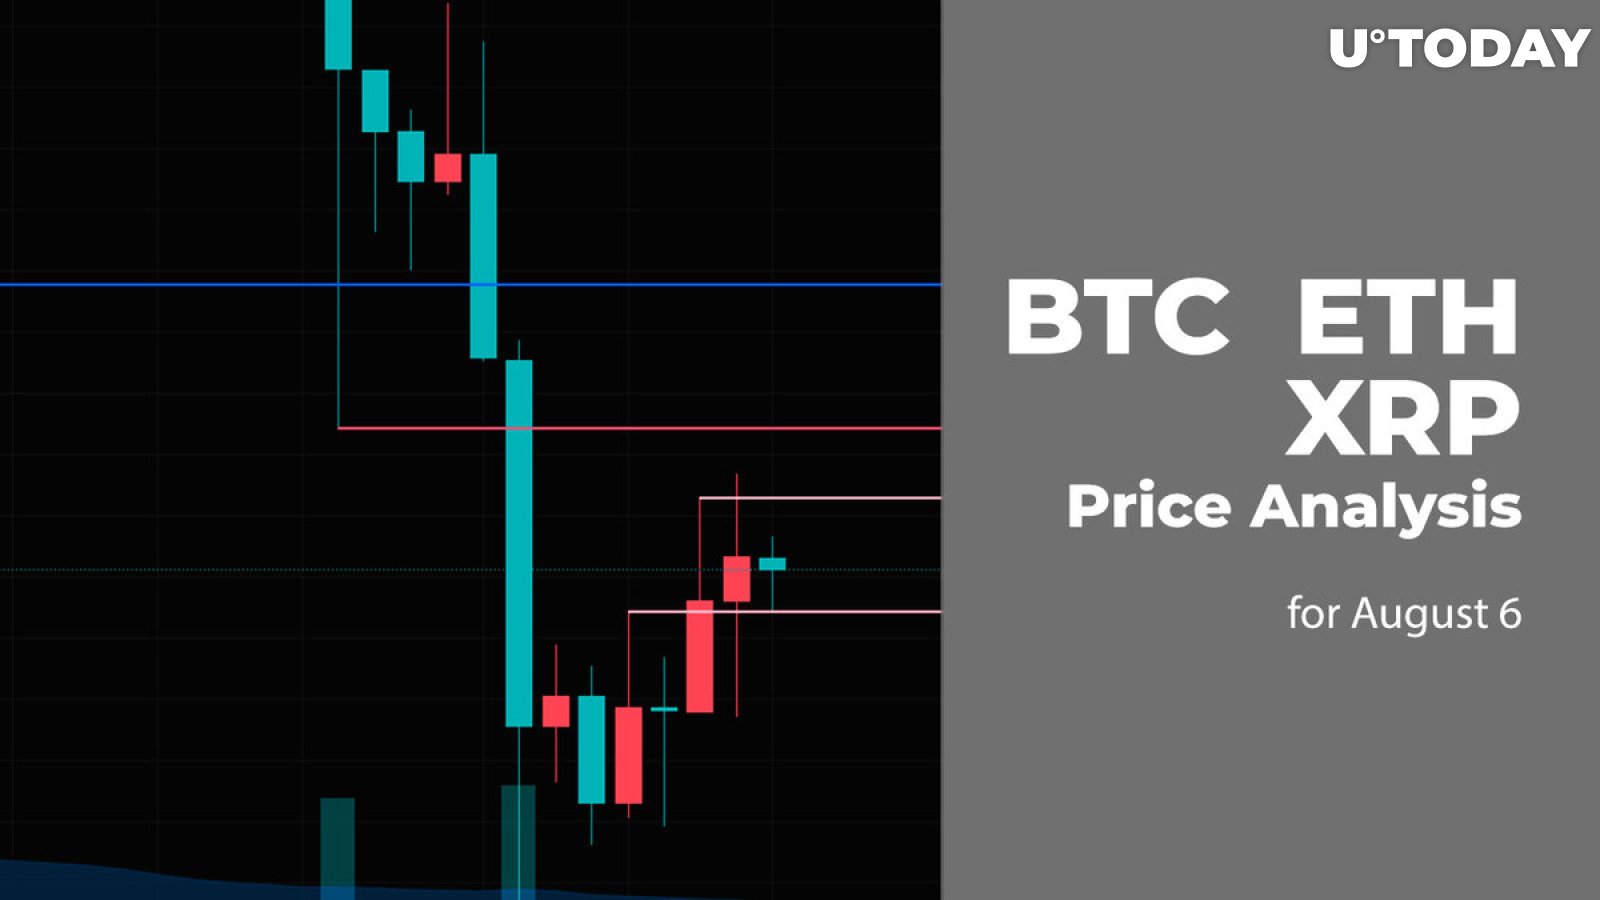 BTC, ETH and XRP Price Analysis for August 6